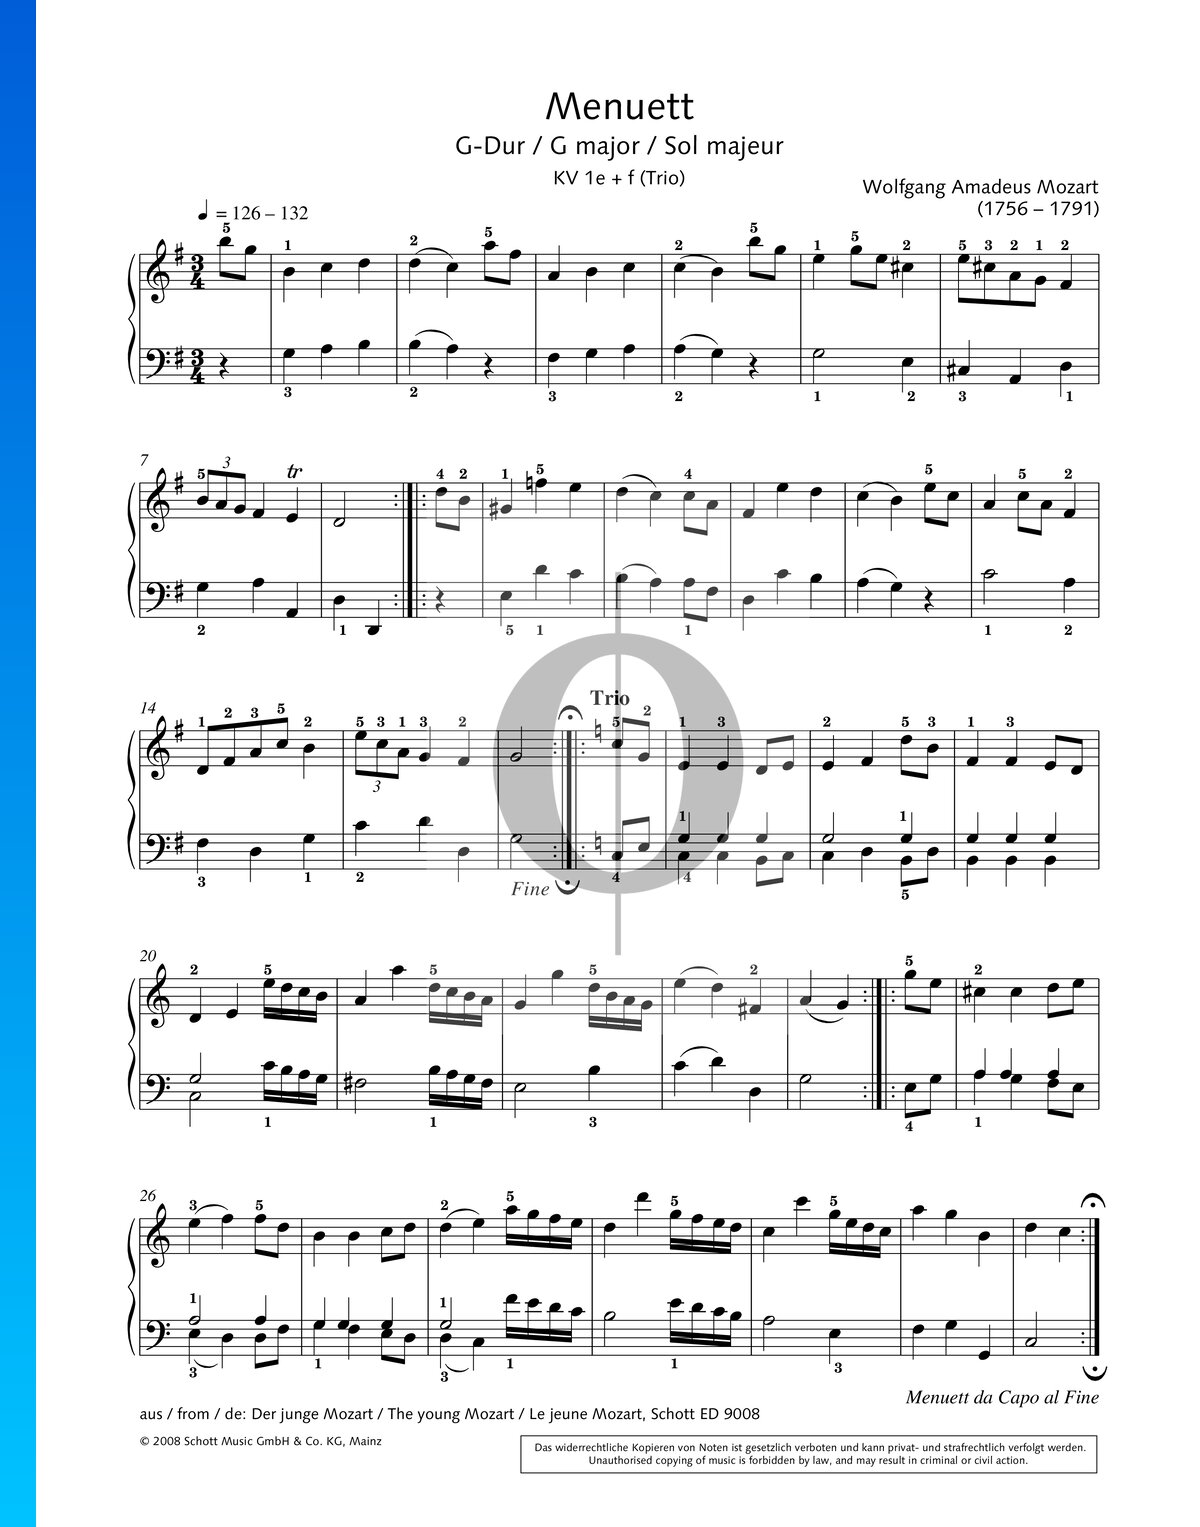 Louis Tomlinson - Miss you Sheet music for Piano (Solo)